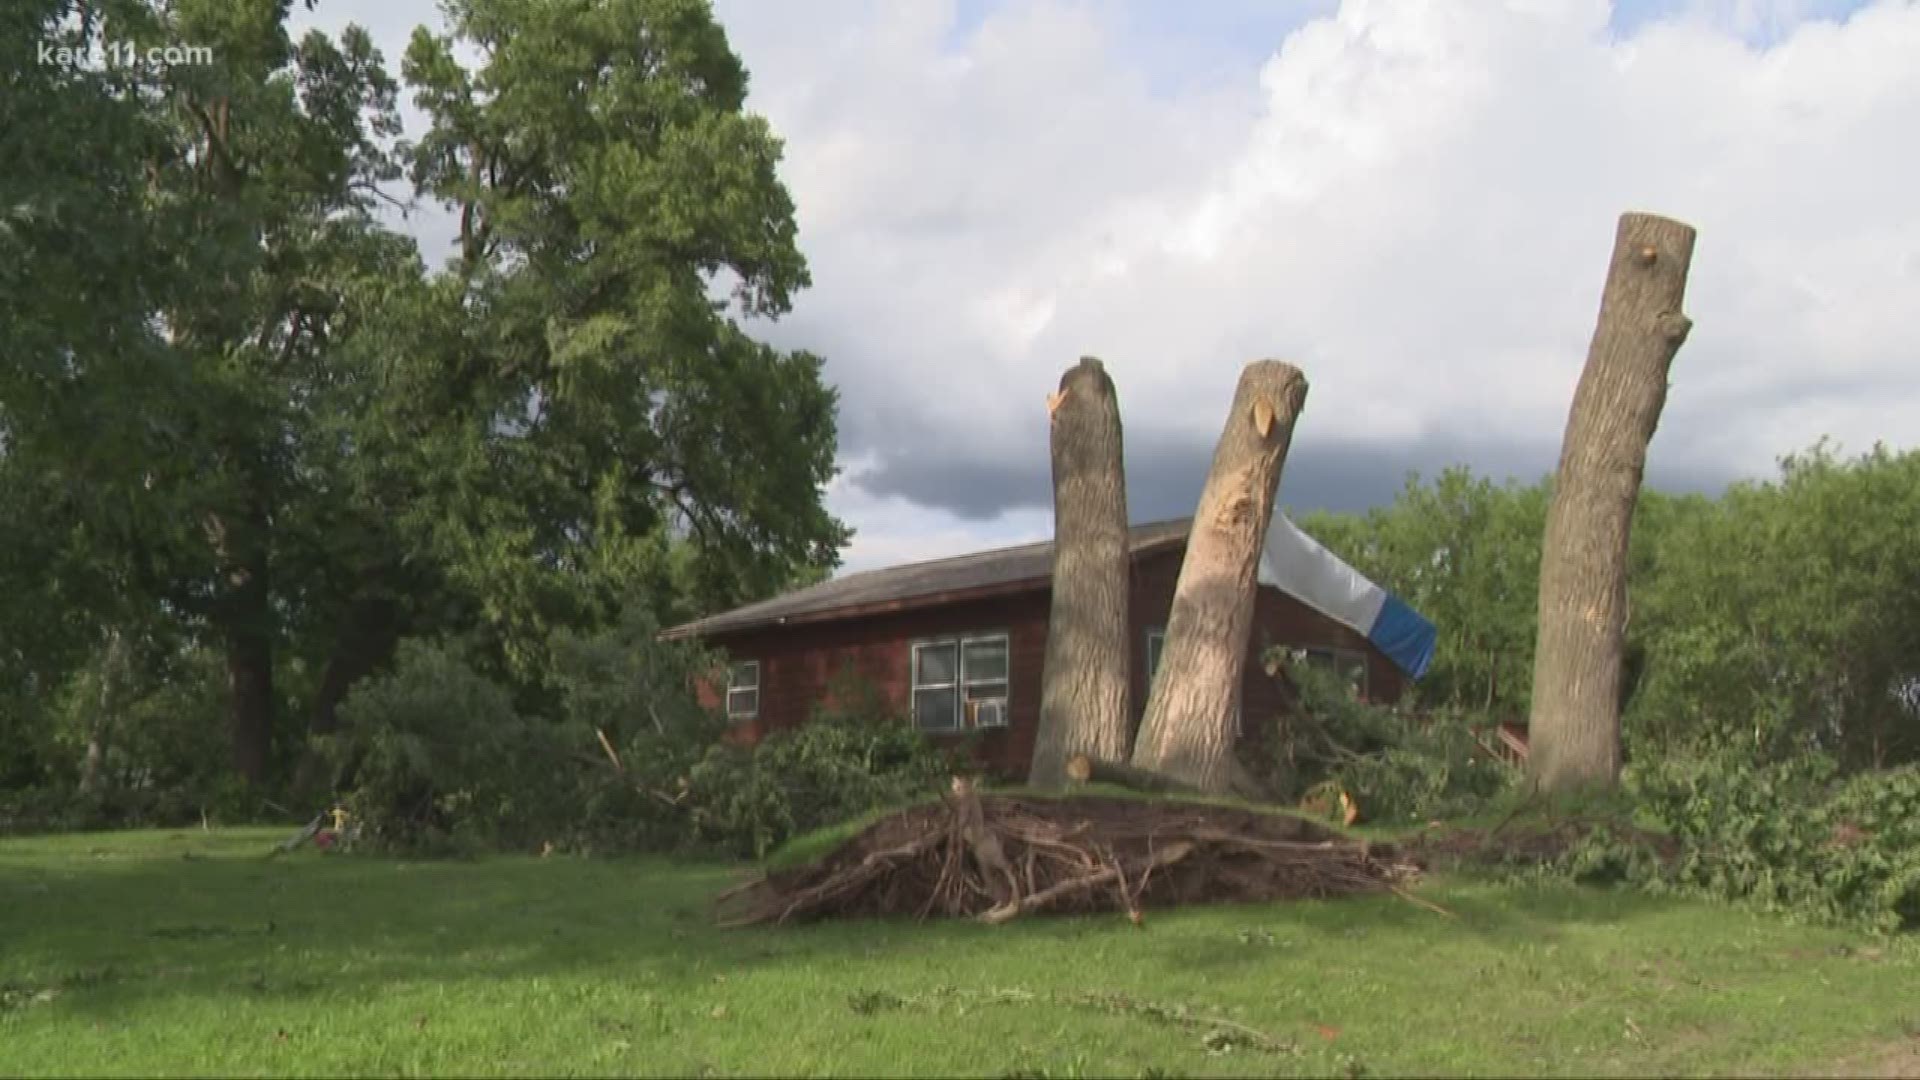 There will be volunteers in the hardest hit county, Polk County, helping to remove trees and other debris. But as our Heidi Wigdahl explains, for one woman, this damage couldn't have come at worse time.